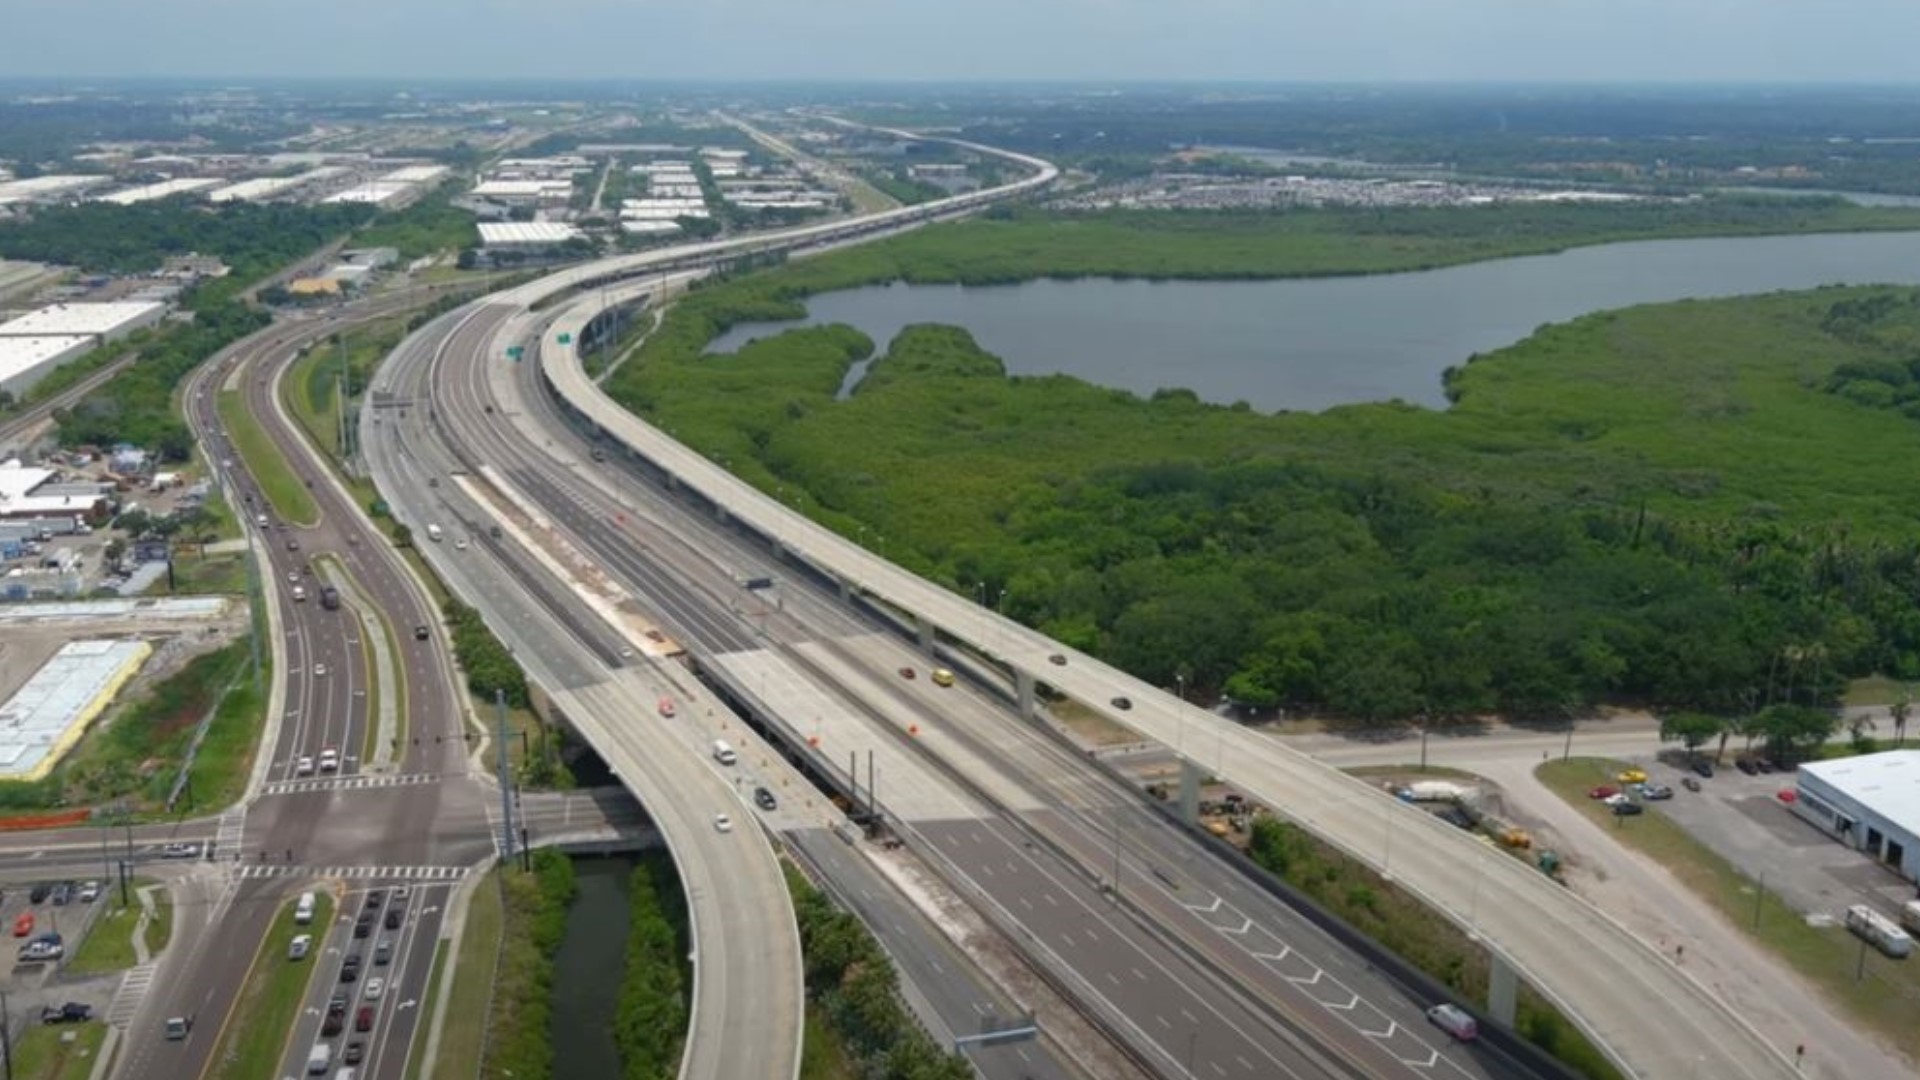 Local area tolls, including the Selmon Expressway, were suspended by Gov. Ron DeSantis before Hurricane Ian.